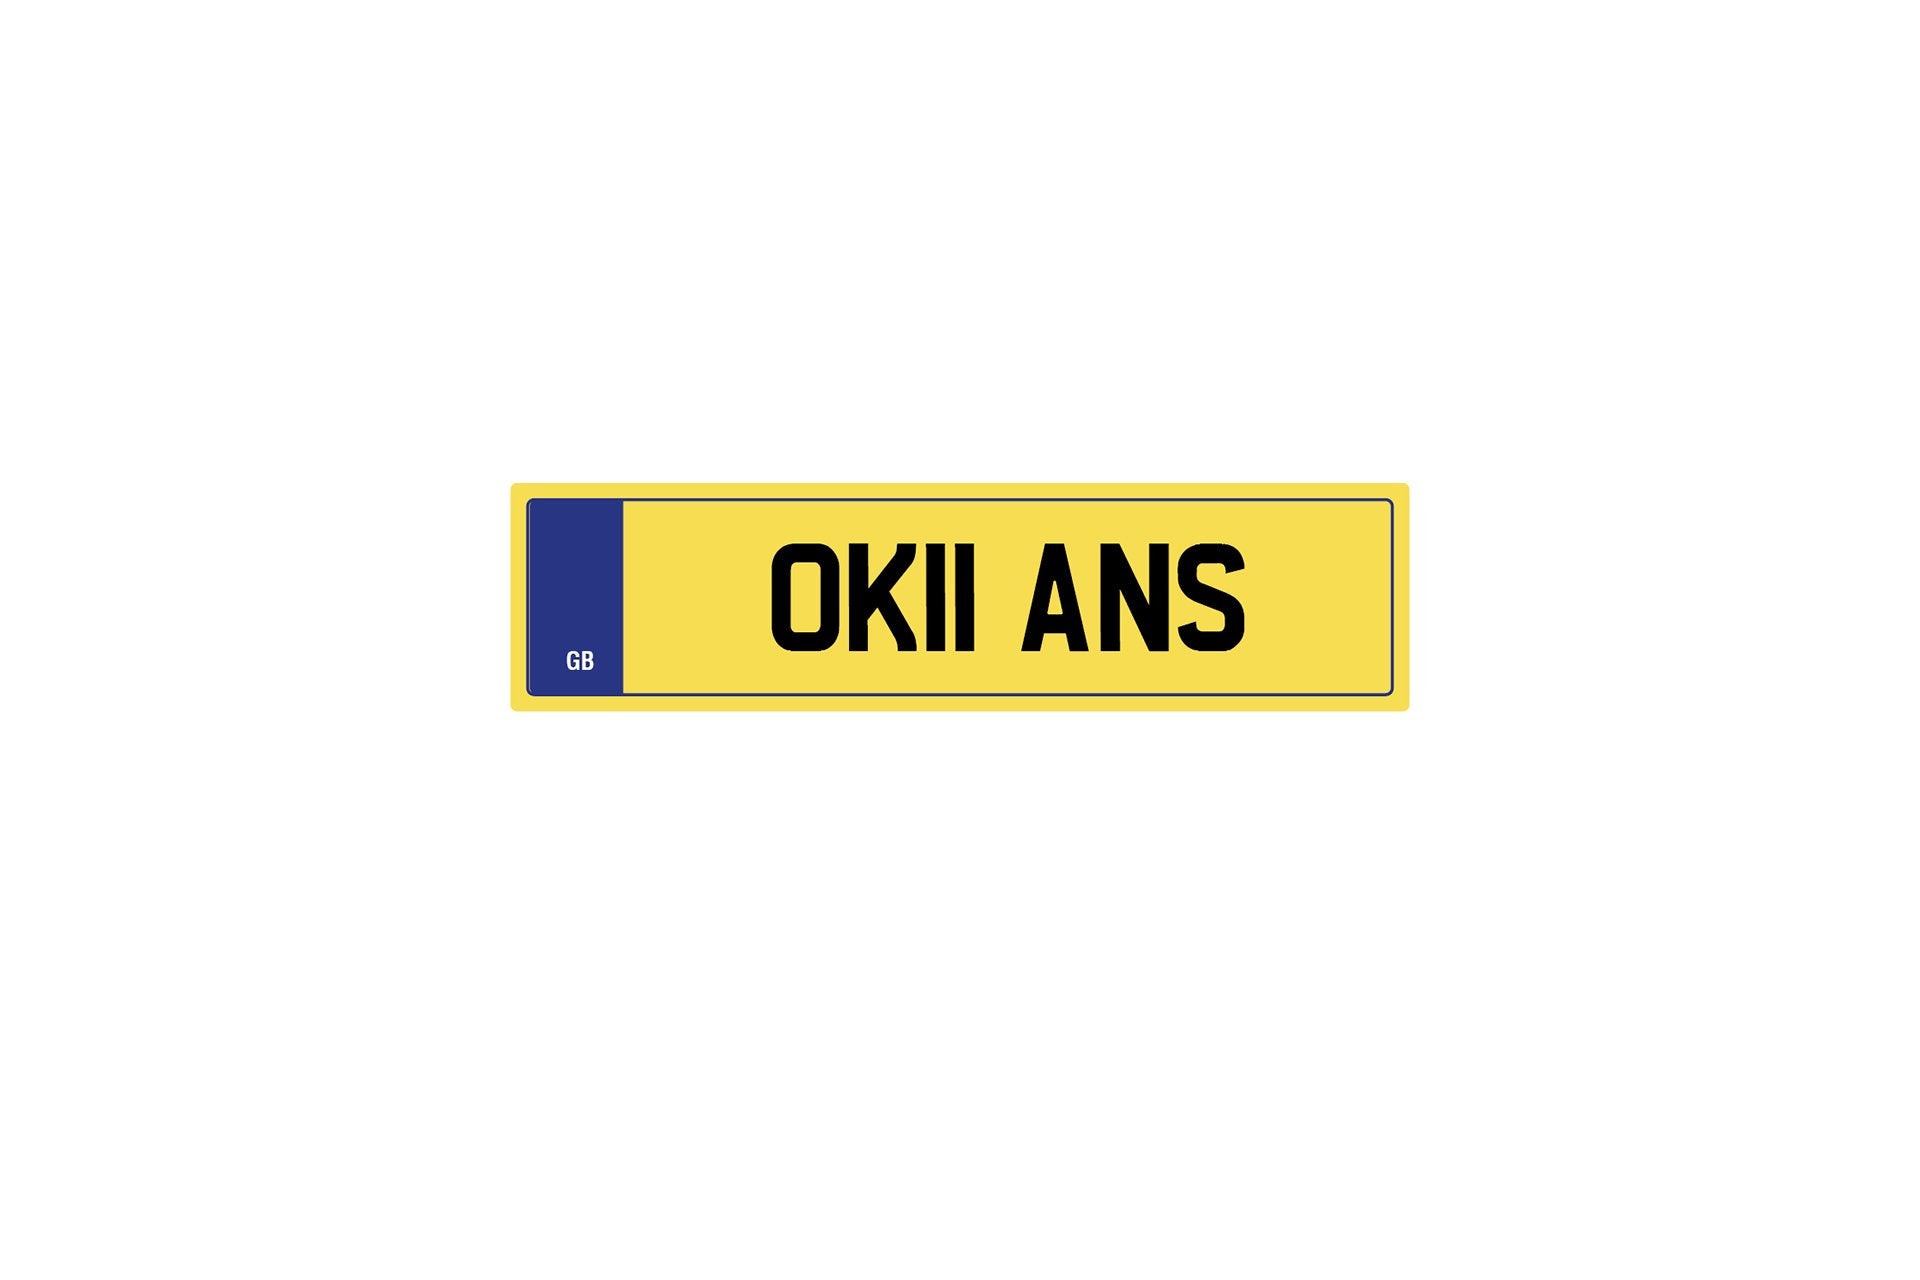 Private Plate Ok11 Ans by Kahn - Image 183